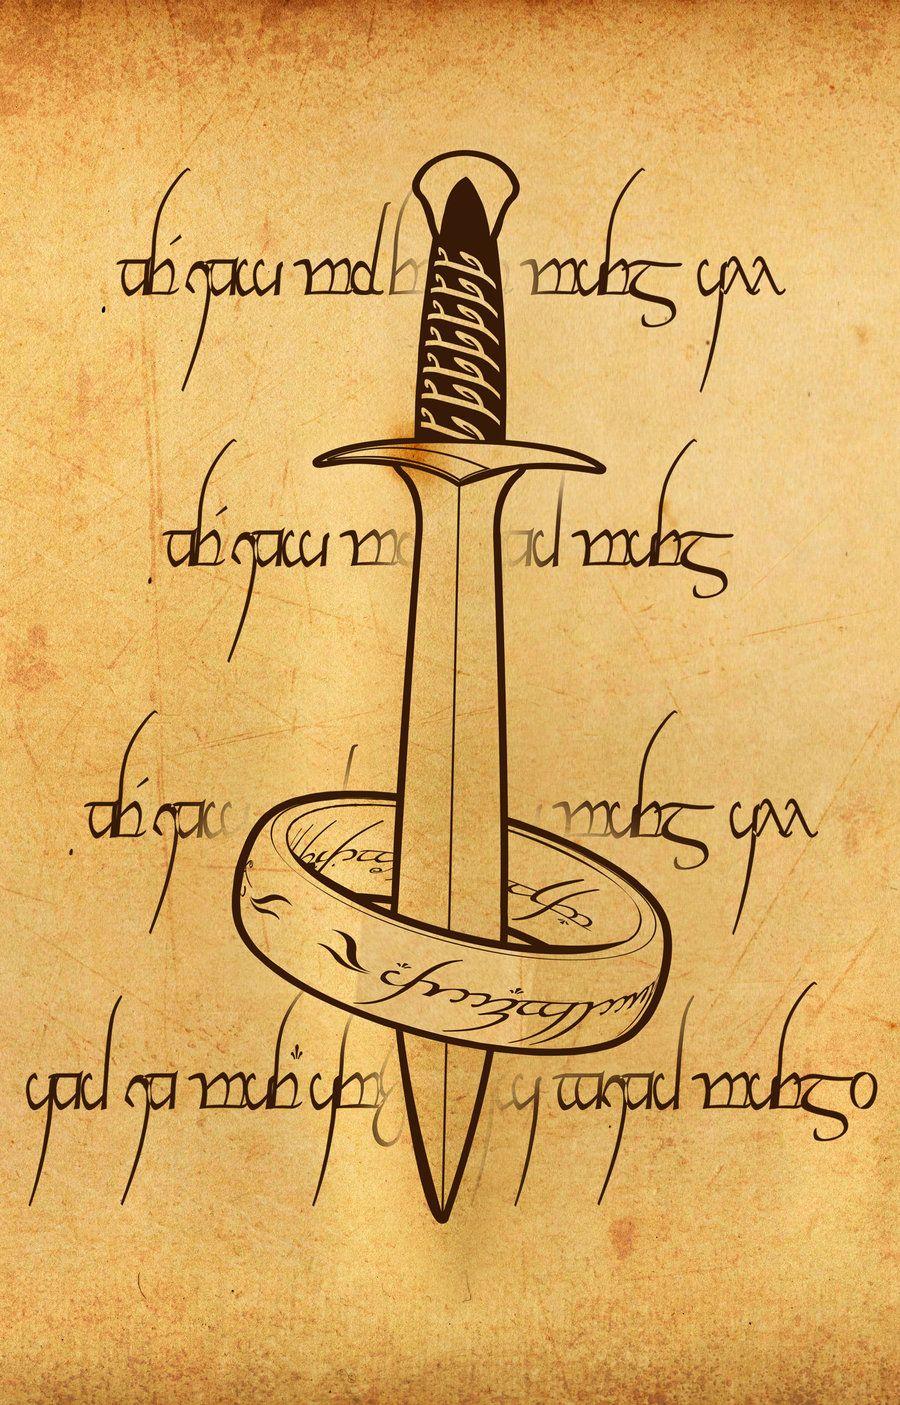 LOTR iphone wallpaper by Pilgrimwanders. I WILL TAKE THE